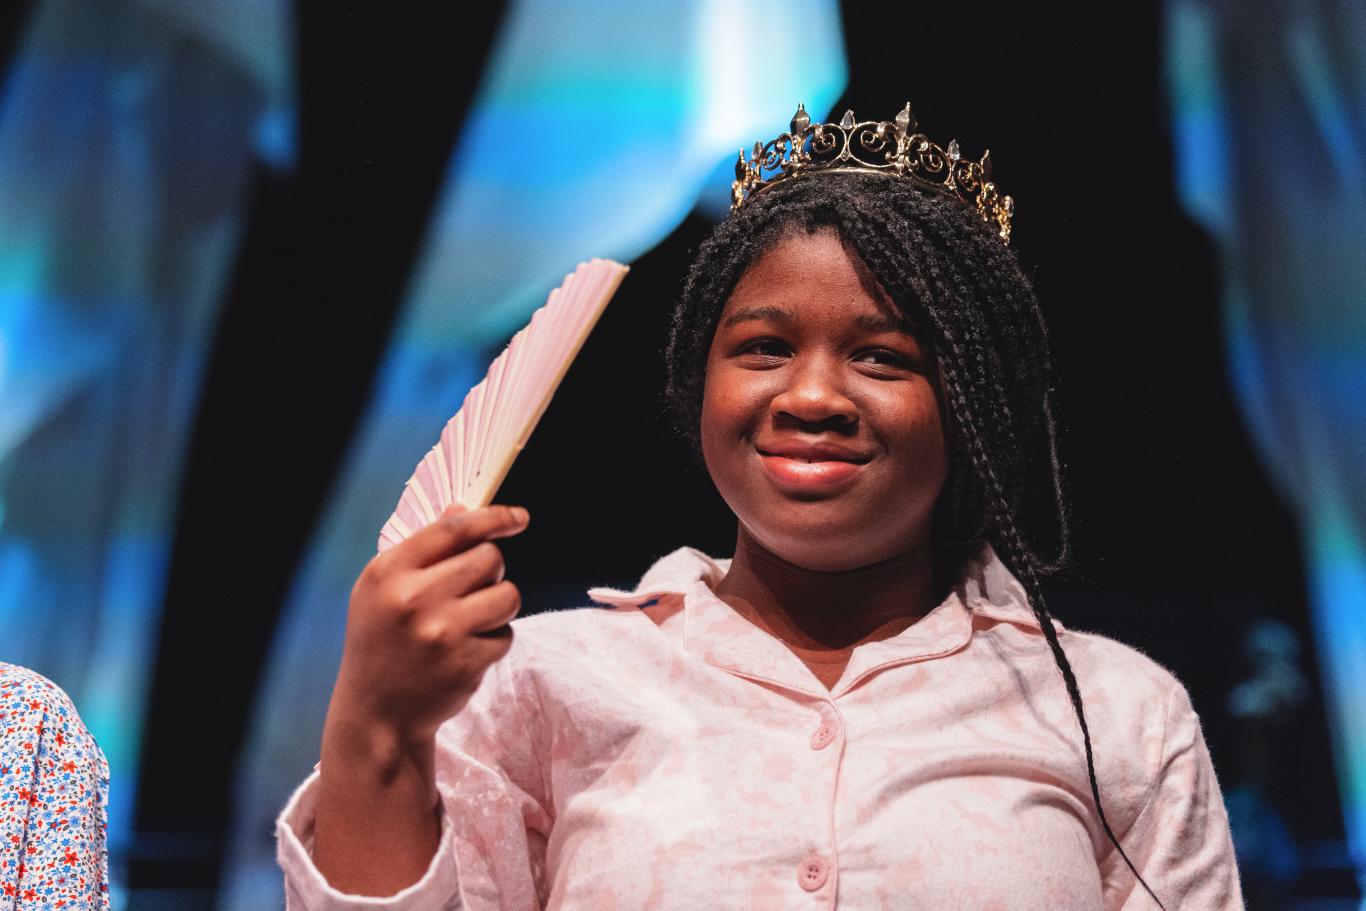 An LC2 (Year 8) CLC pupil holds and fan and wears a crown while performing in a production of 'Toy Box Tales' in the Parabola Arts Centre theatre